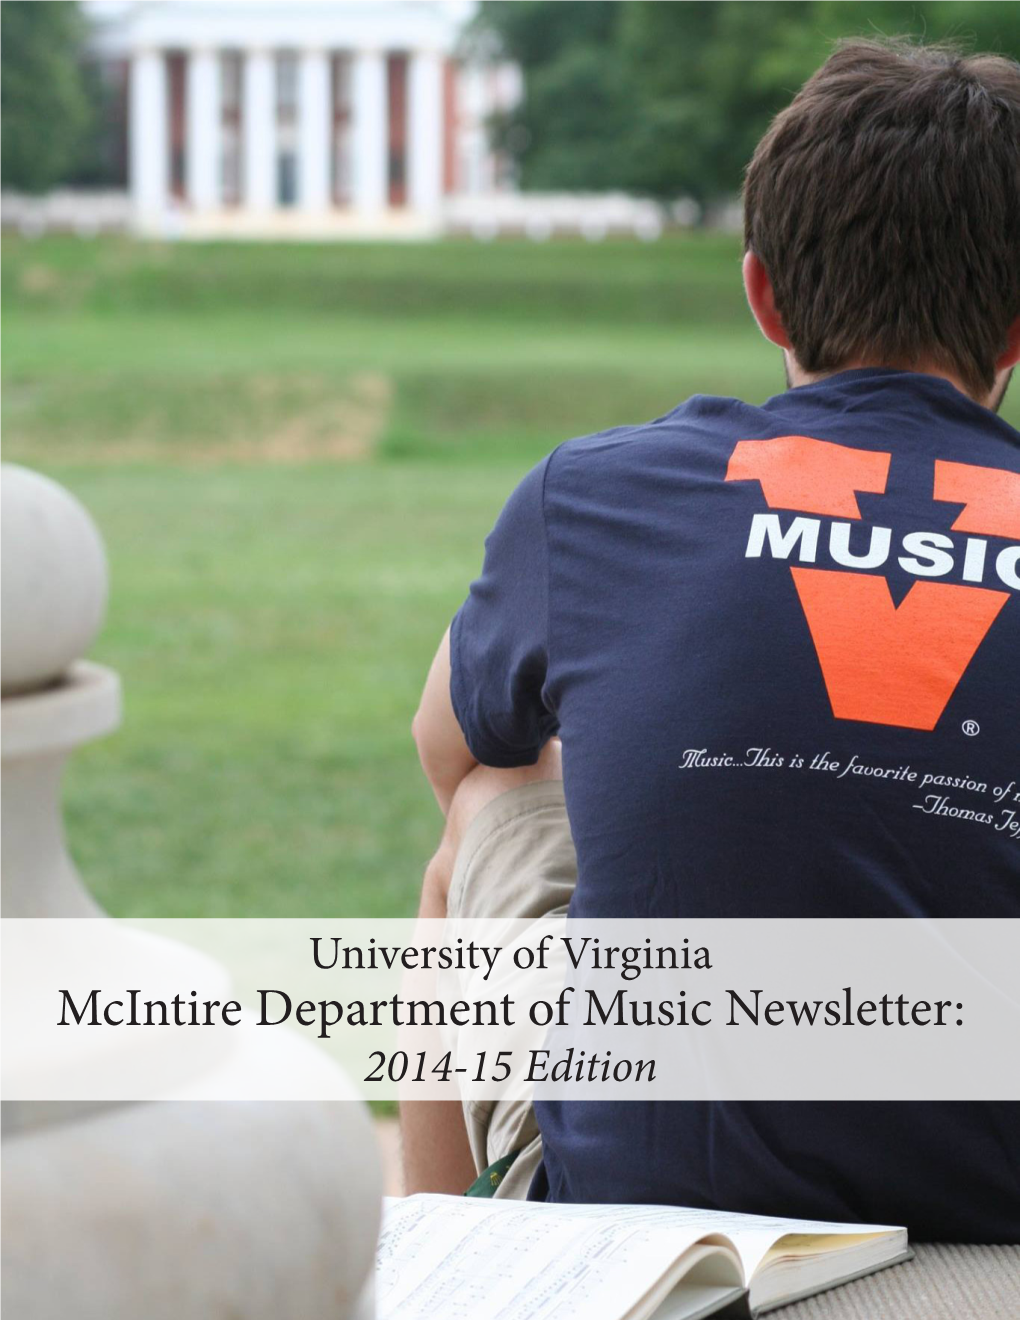 Mcintire Department of Music Newsletter: 2014-15 Edition